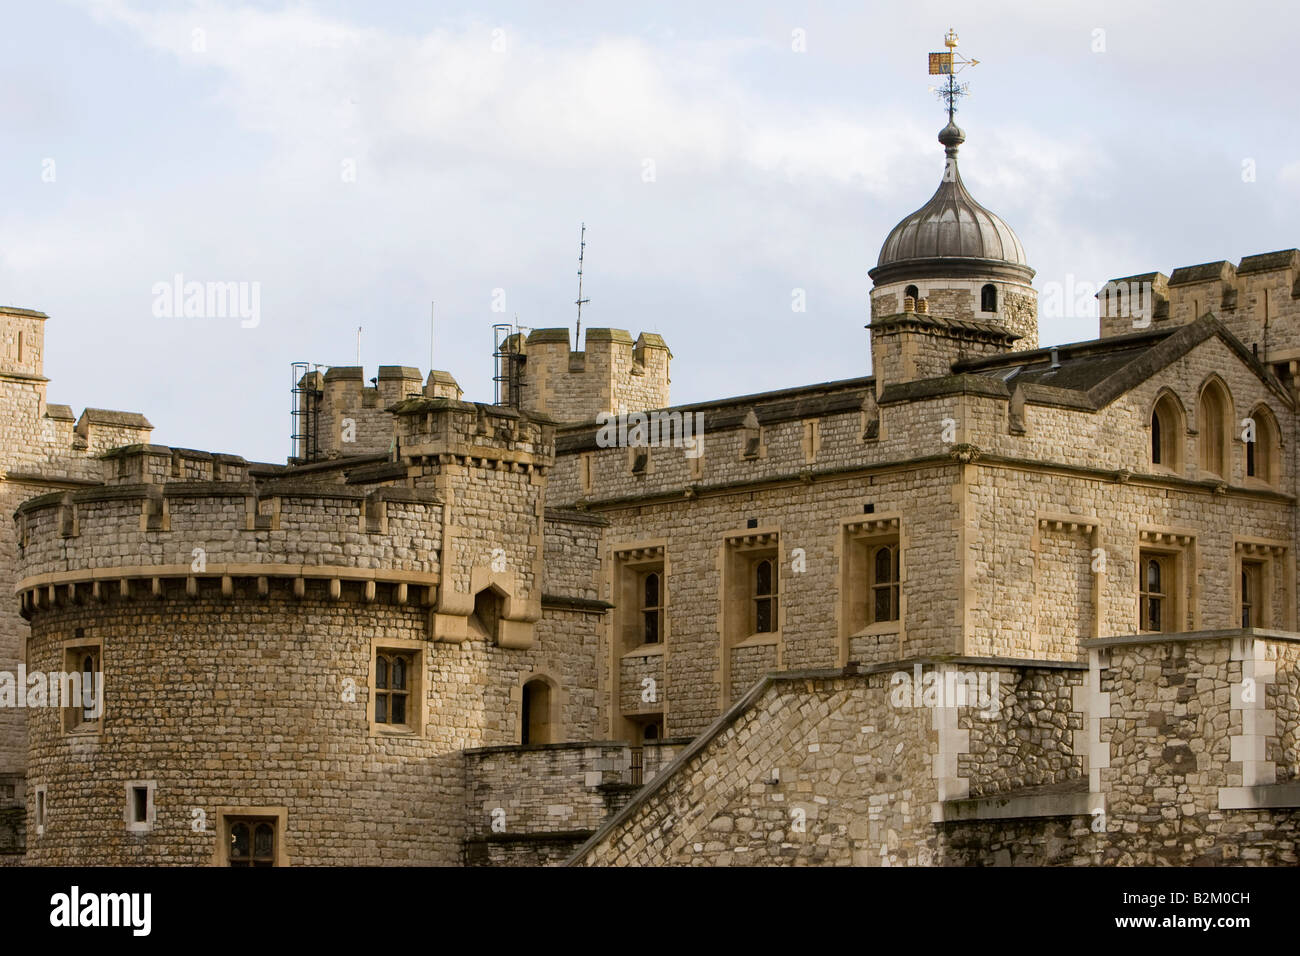 The Tower of London in London UK 12 5 2007 Stock Photo